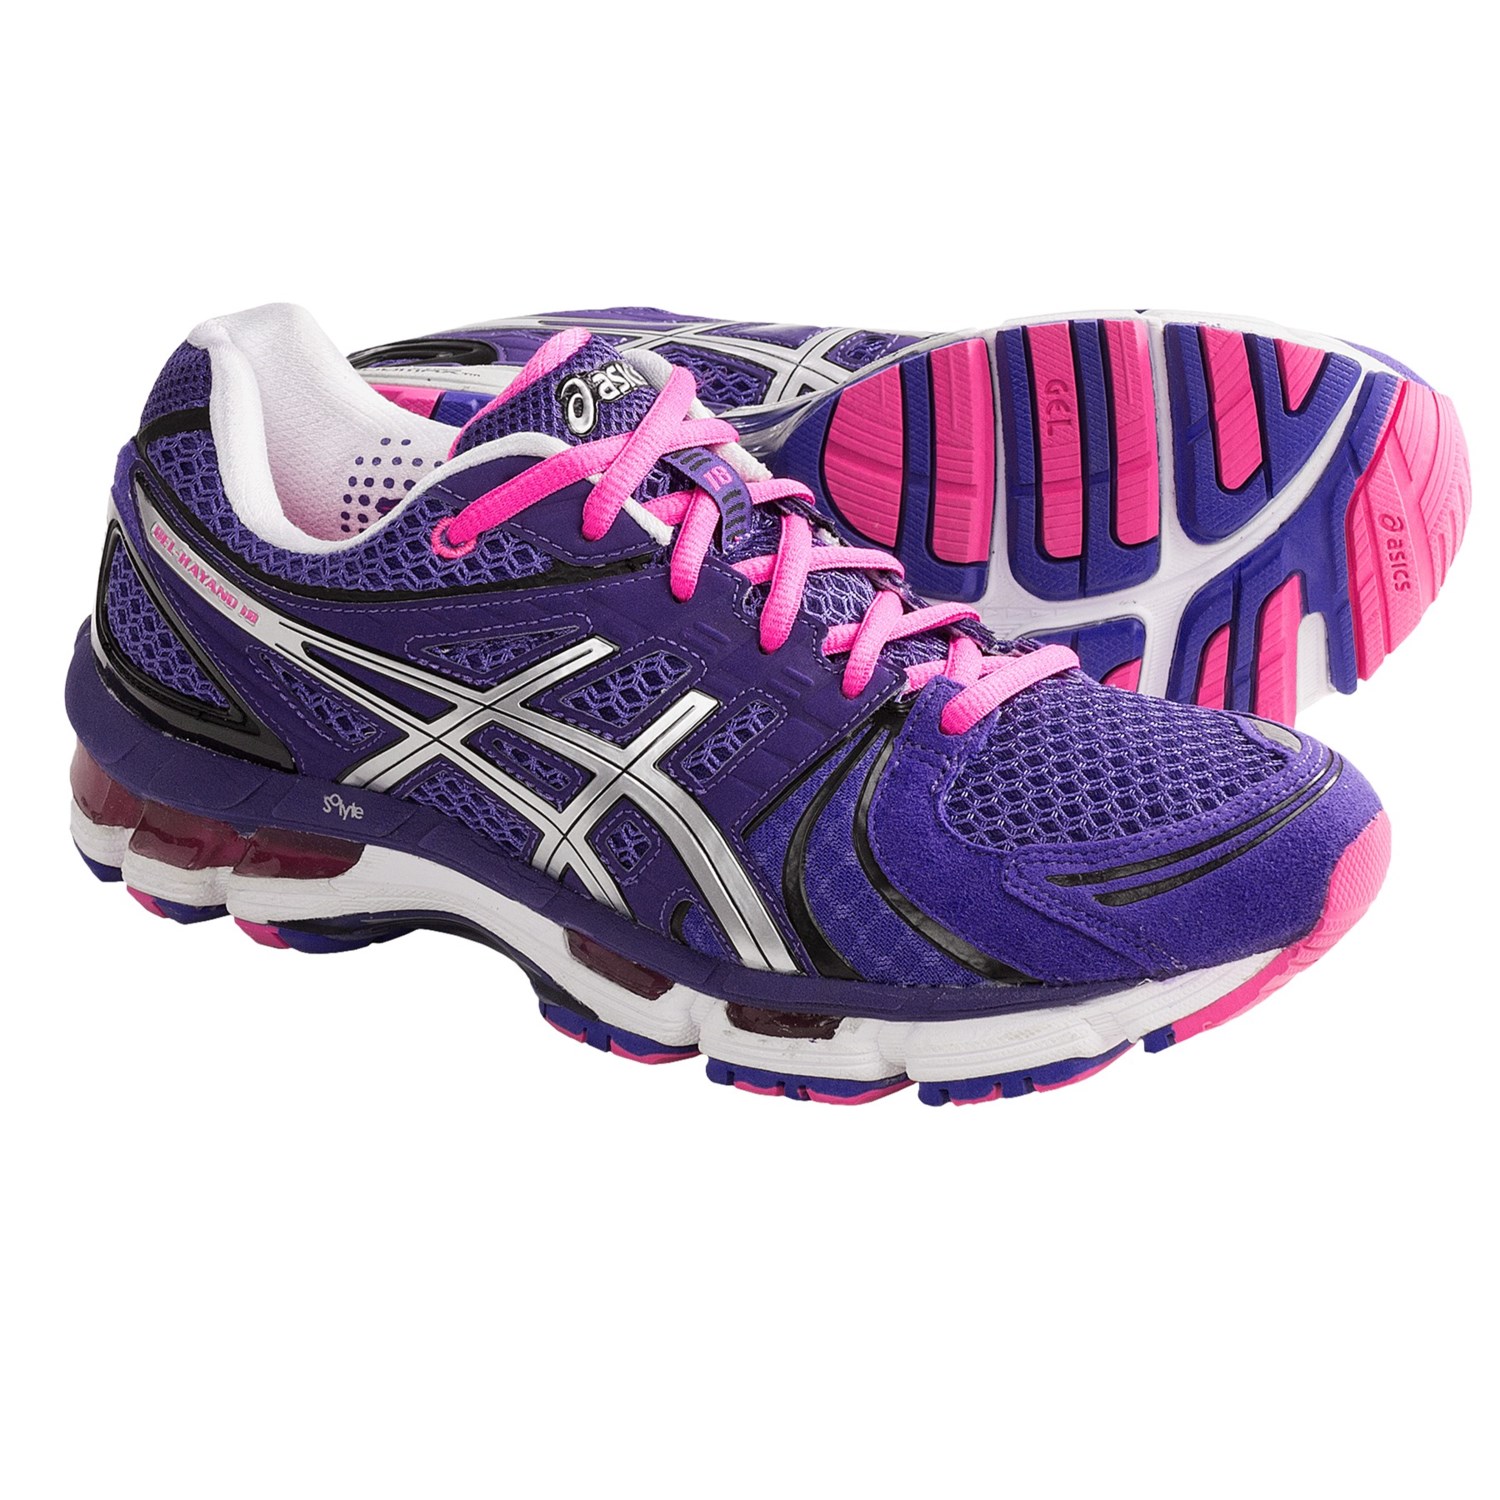 Asics Gel Kayano 18 Womens Running Shoes Pictures to pin on Pinterest